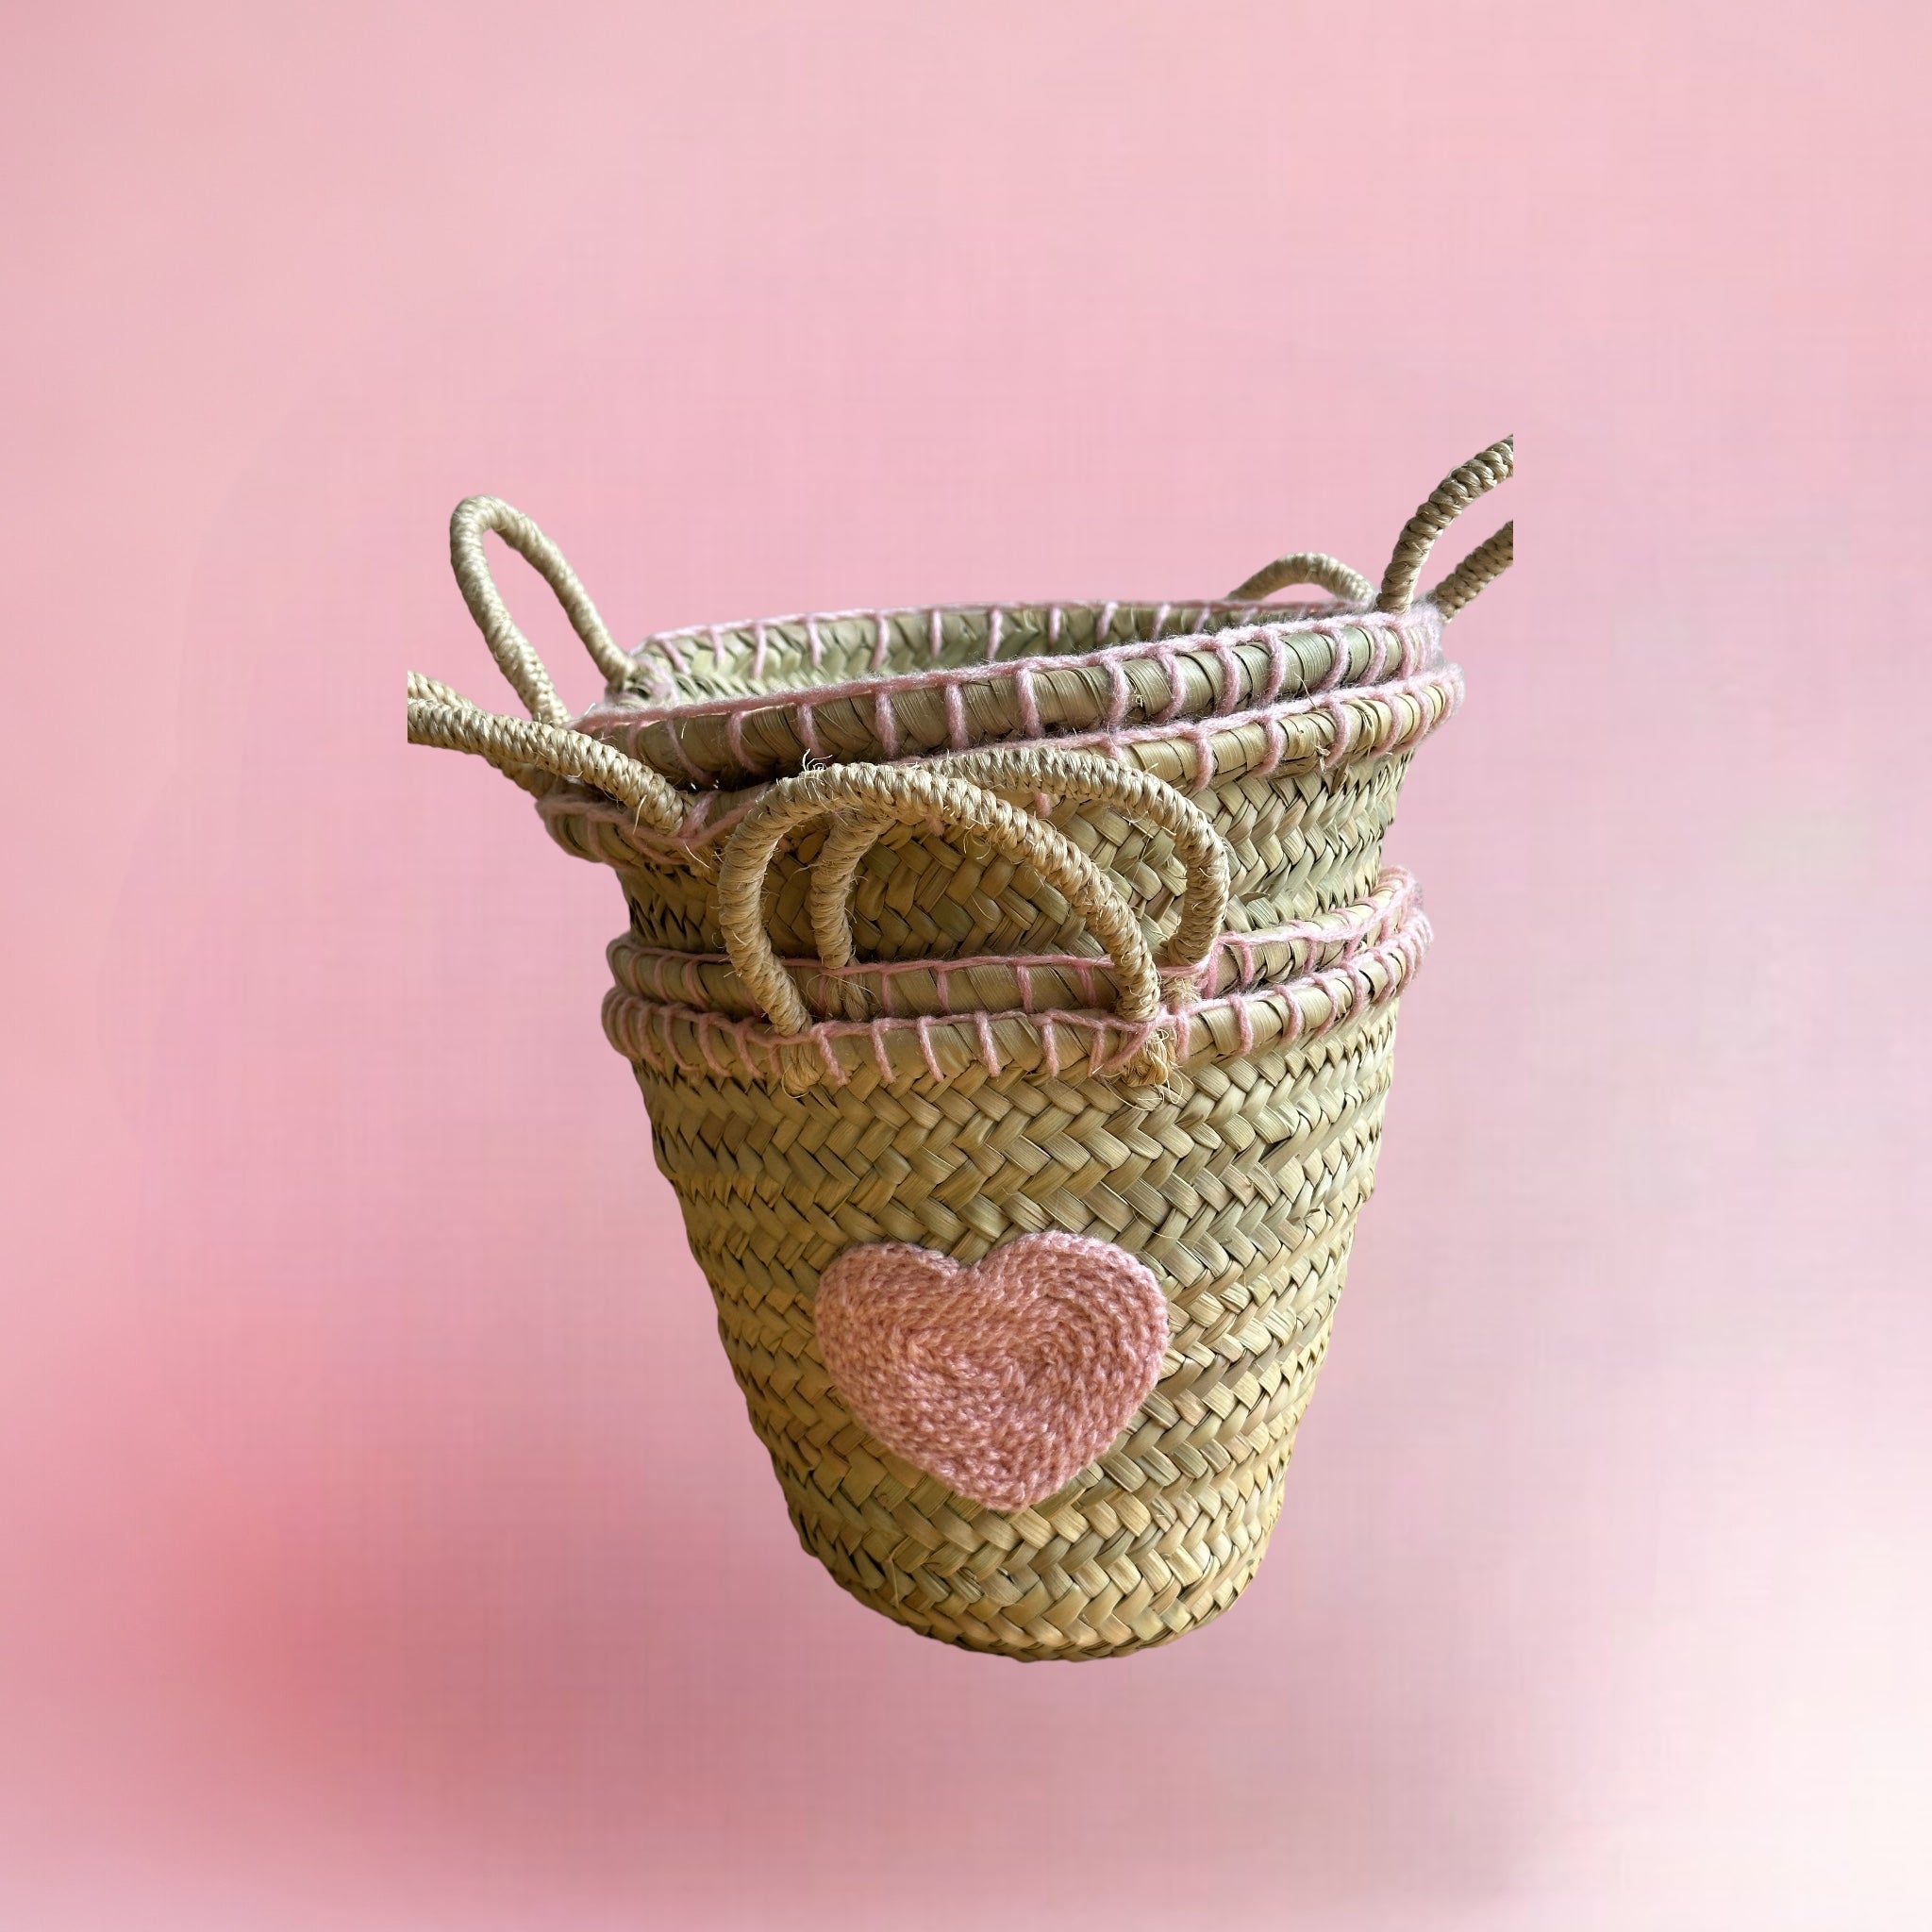 NEW: Small basket bag made of palm leaf with embroidery